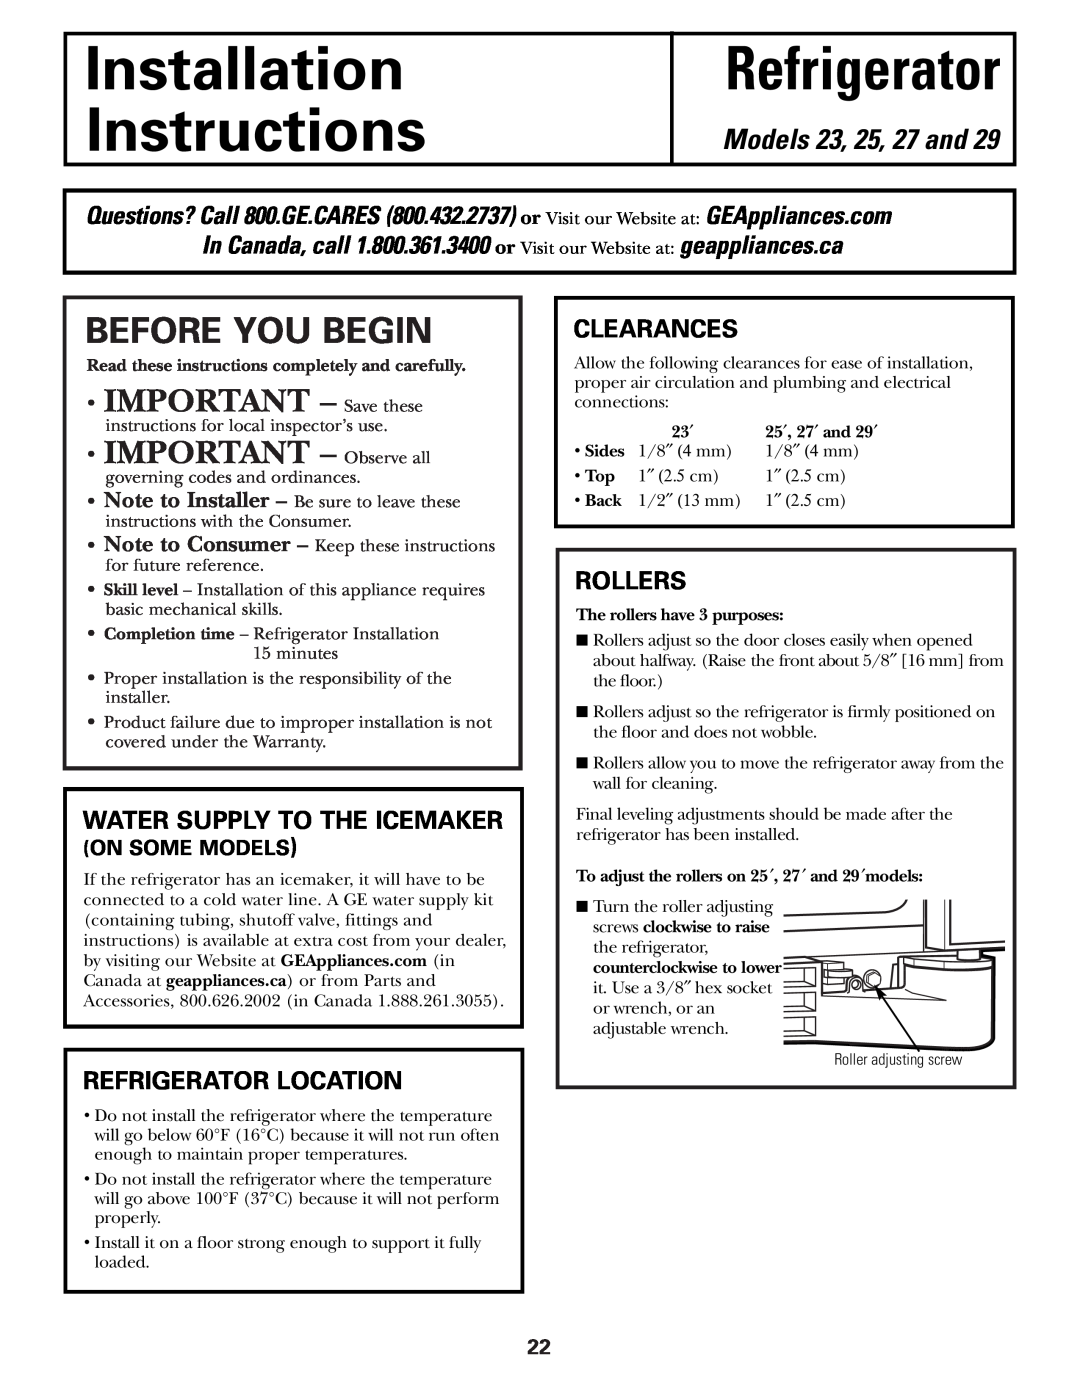 GE 200D2600P015 Installation Instructions, Before You Begin, Models 23, 25, 27 and, Refrigerator Location, Clearances 